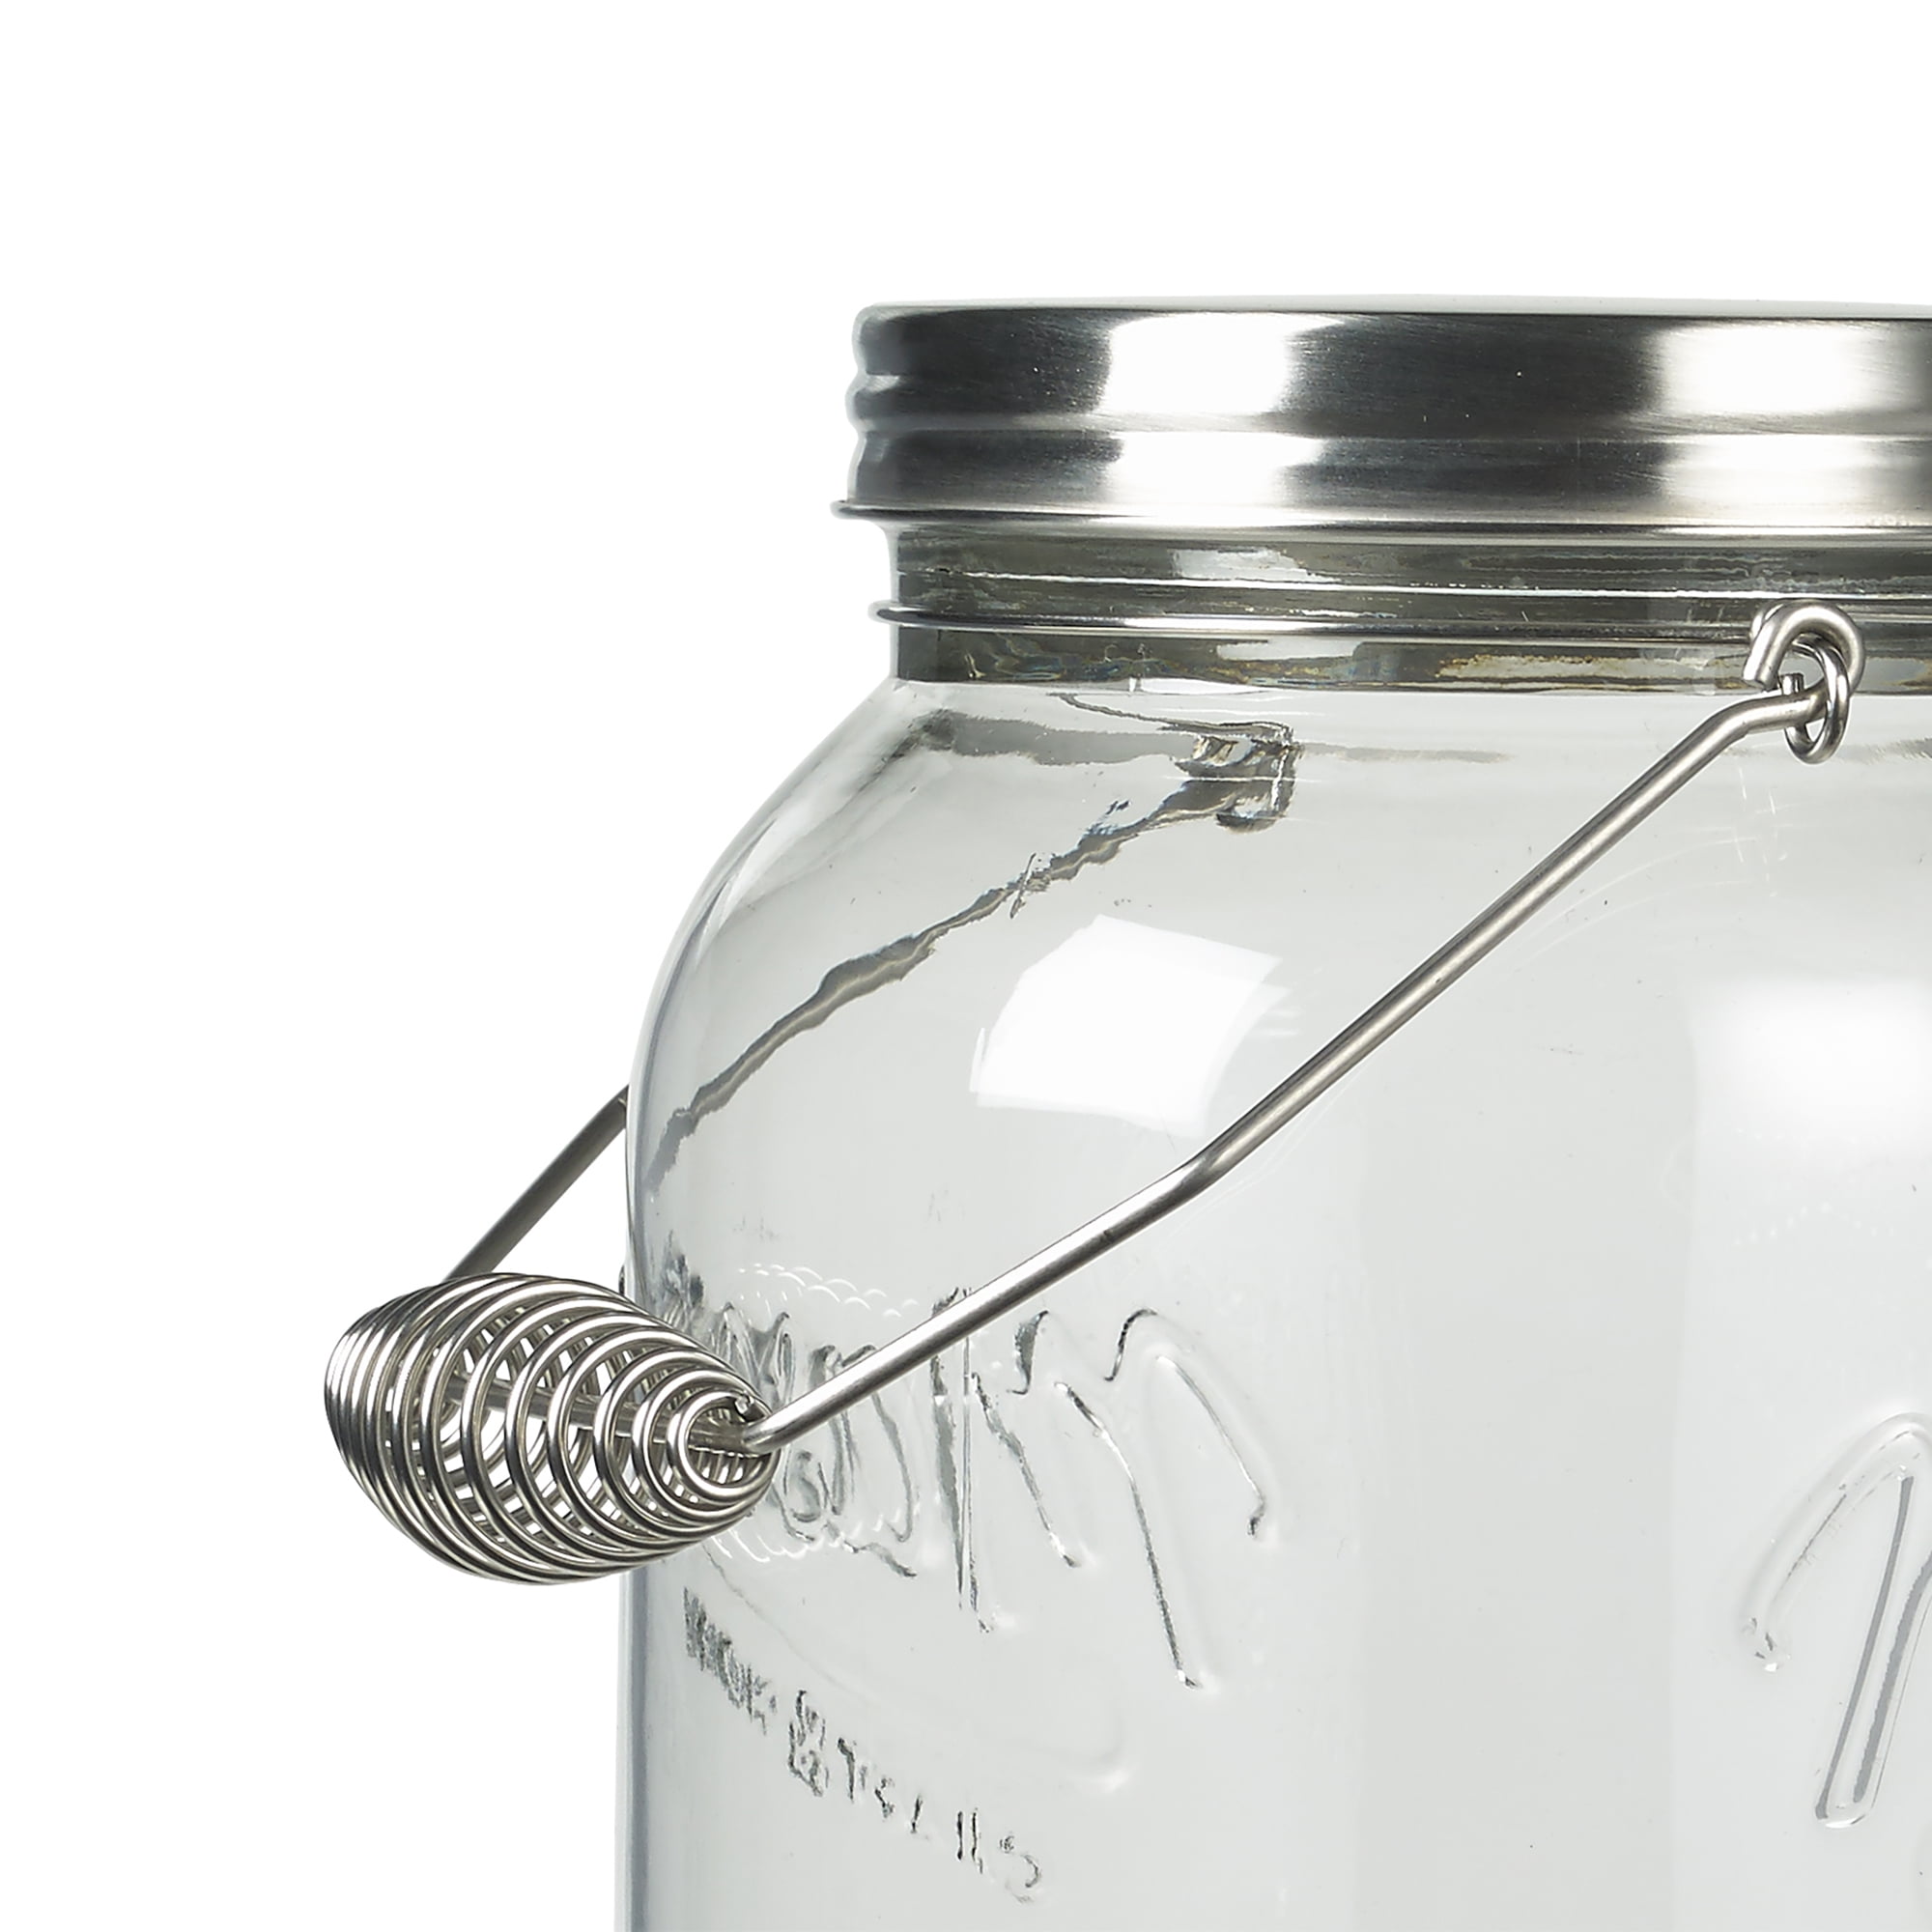 Mason Craft & More Glass Jar with Handle and Lid - Clear, 32 oz - Fred Meyer